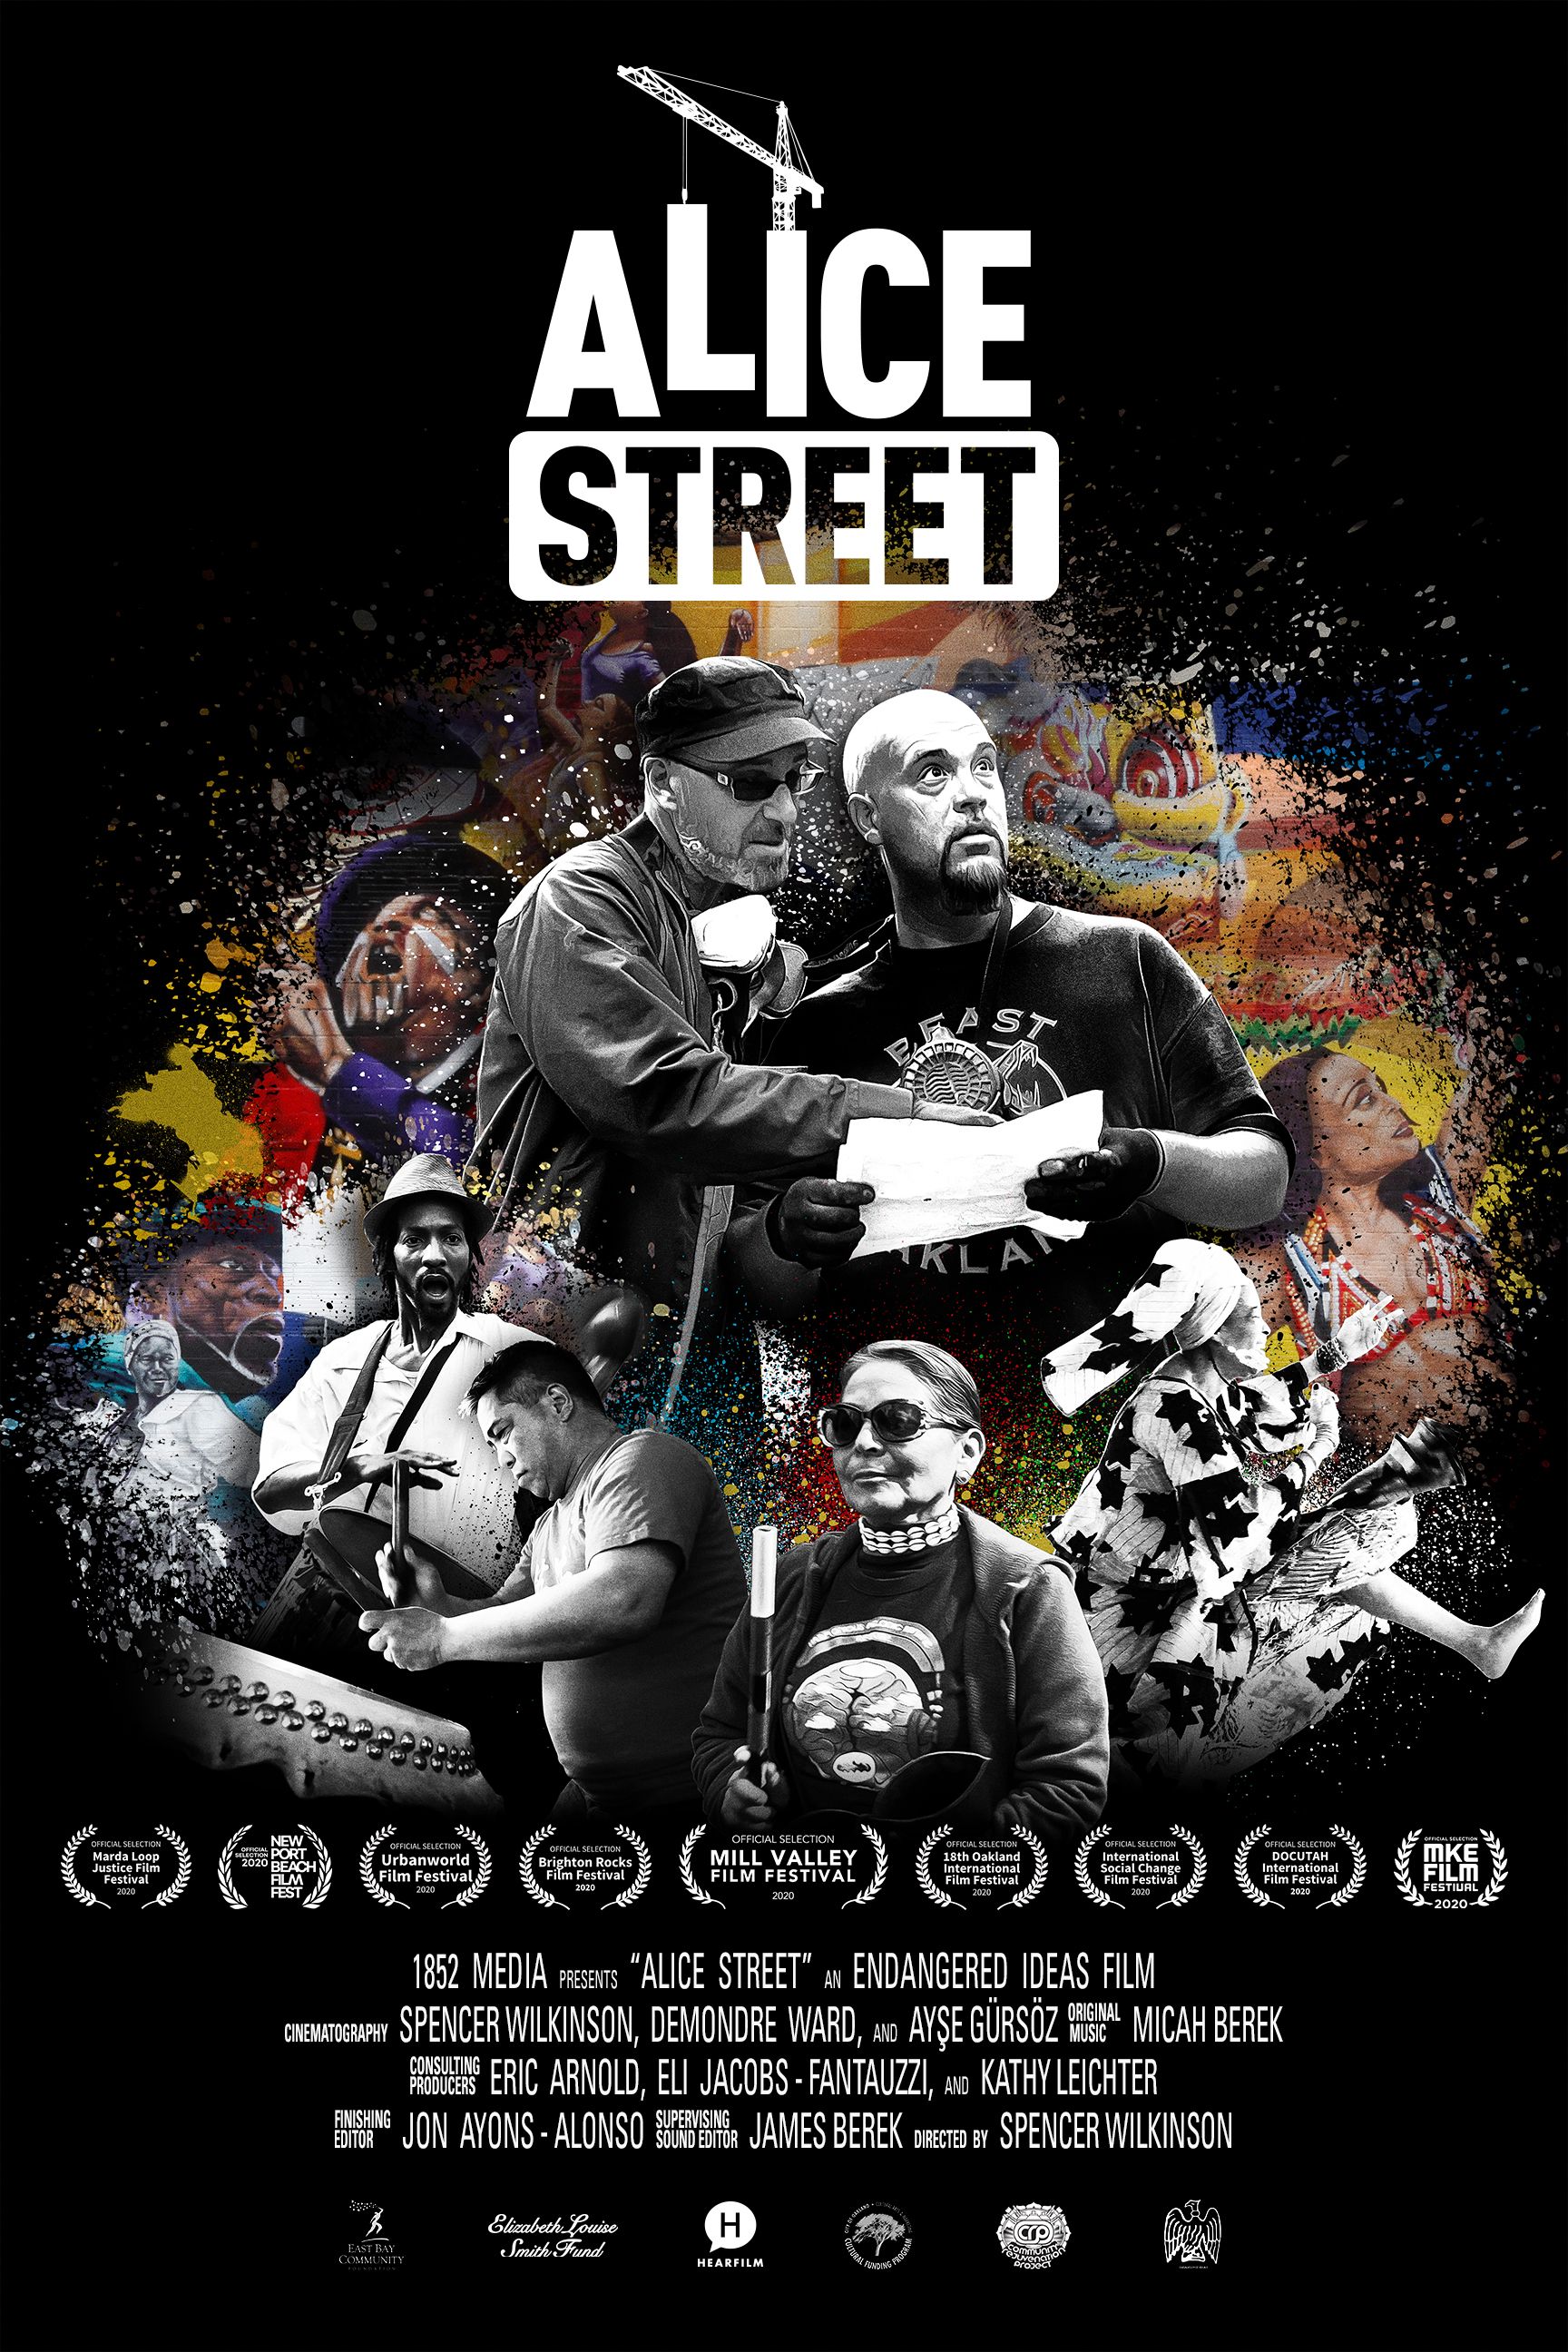 On Feb. 26, KDocsFF’s closing special presentation screens Alice Street directed by Spencer Wilkinson and the short film Jean Swanson: We Need a New Map¬ by Teresa Alfeld.